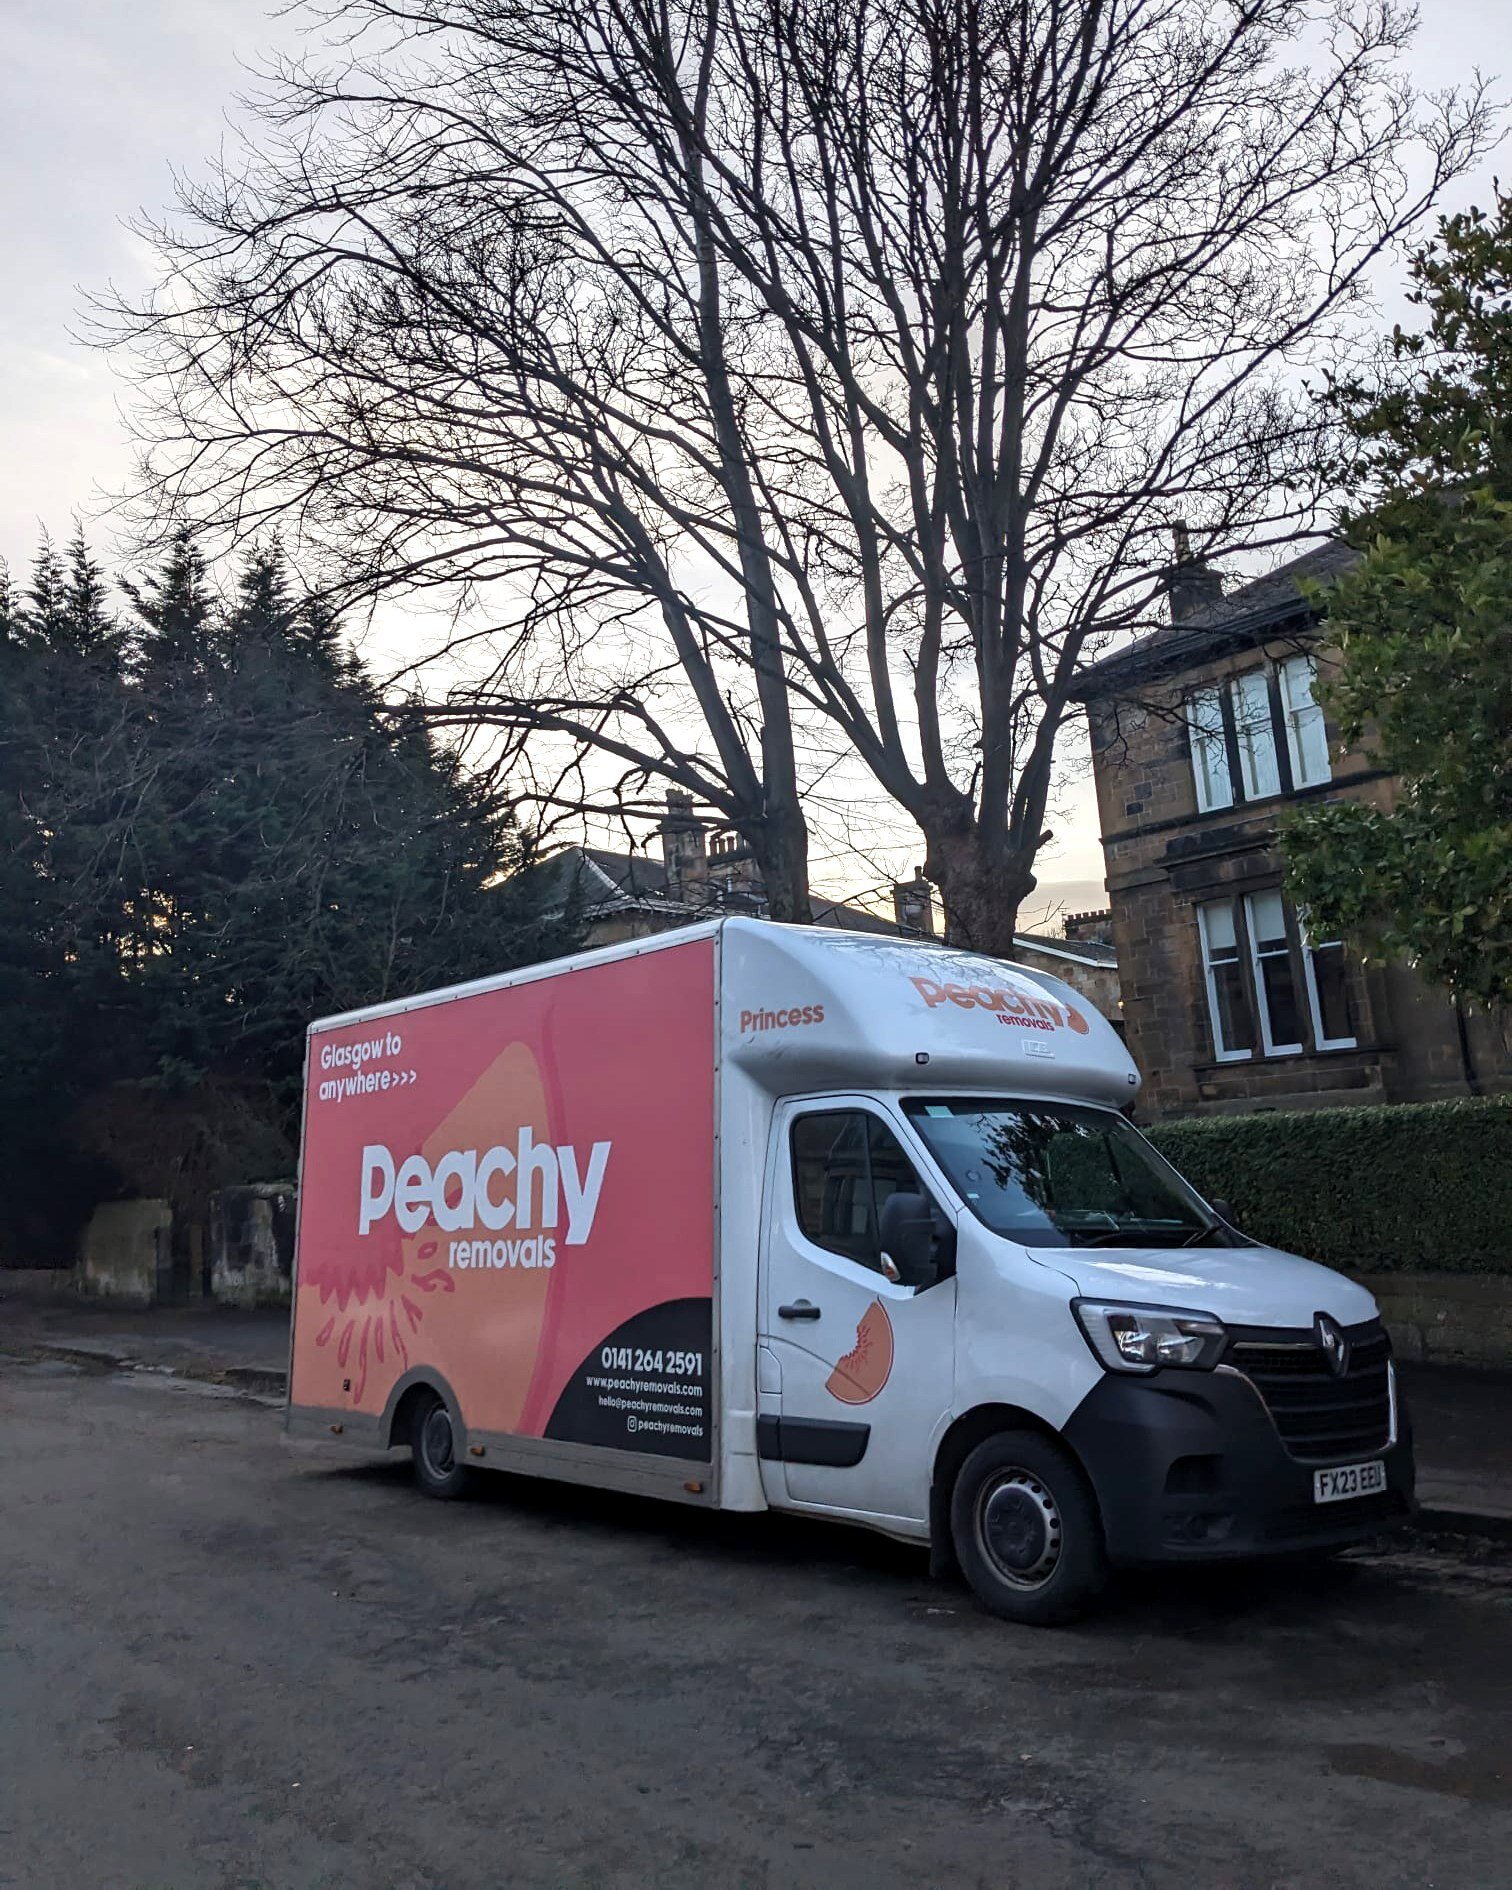 Atmospheric morning moves part 2. Princess reporting for duty bright and early 🫡🍑
.
.
.
.
.
#housemove #removals #removalscompany #professionalmovers #peachy #movingandstorage #moversandpackers #packing #movers #moving #movingday #movingcompany #mo